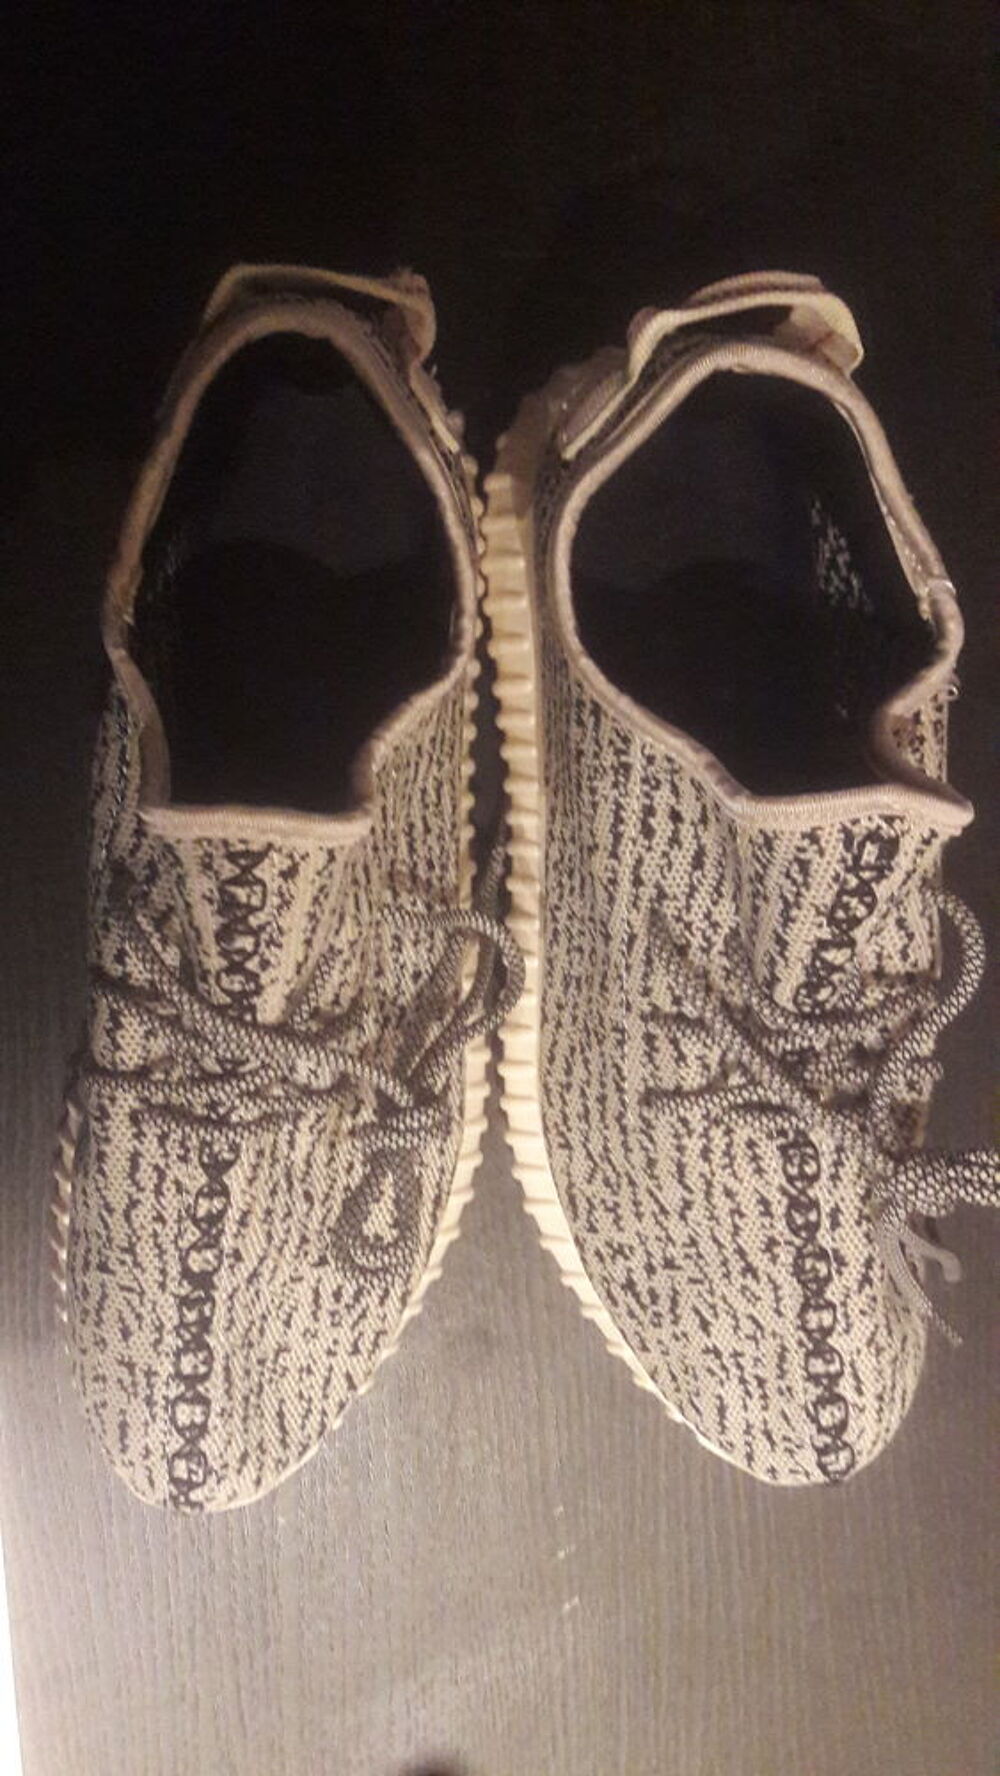 Basket adidas yeezy boost 350 Chaussures